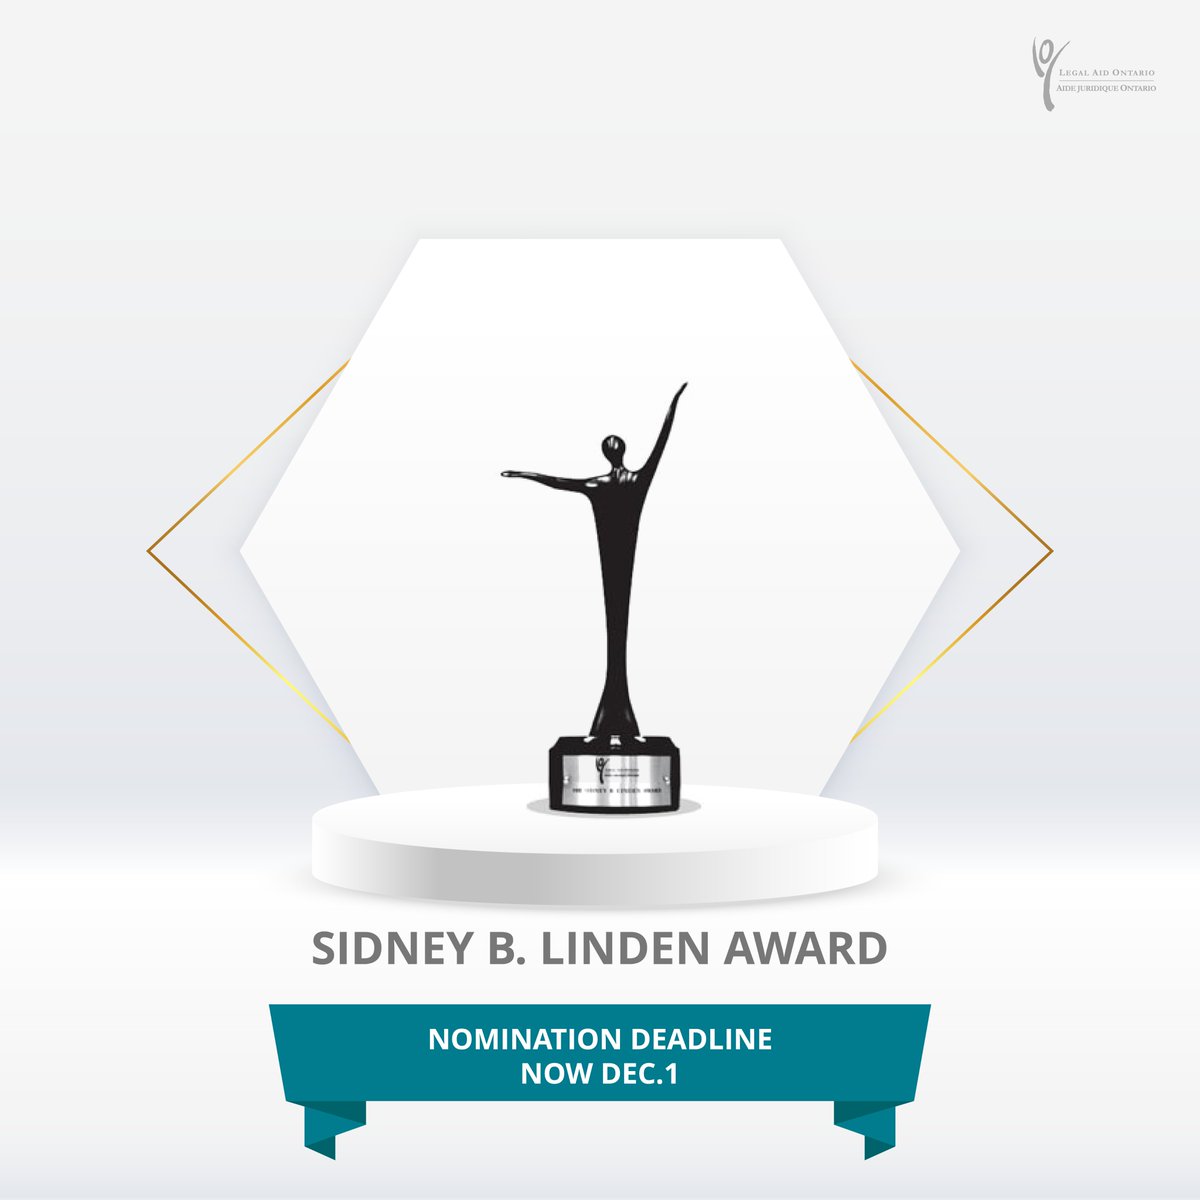 Do you know an exceptional person who deserves recognition for their commitment to access to justice for Ontarians? Nominate them for the Sidney B. Linden award! To learn more, visit legalaid.on.ca/news/deadline-….